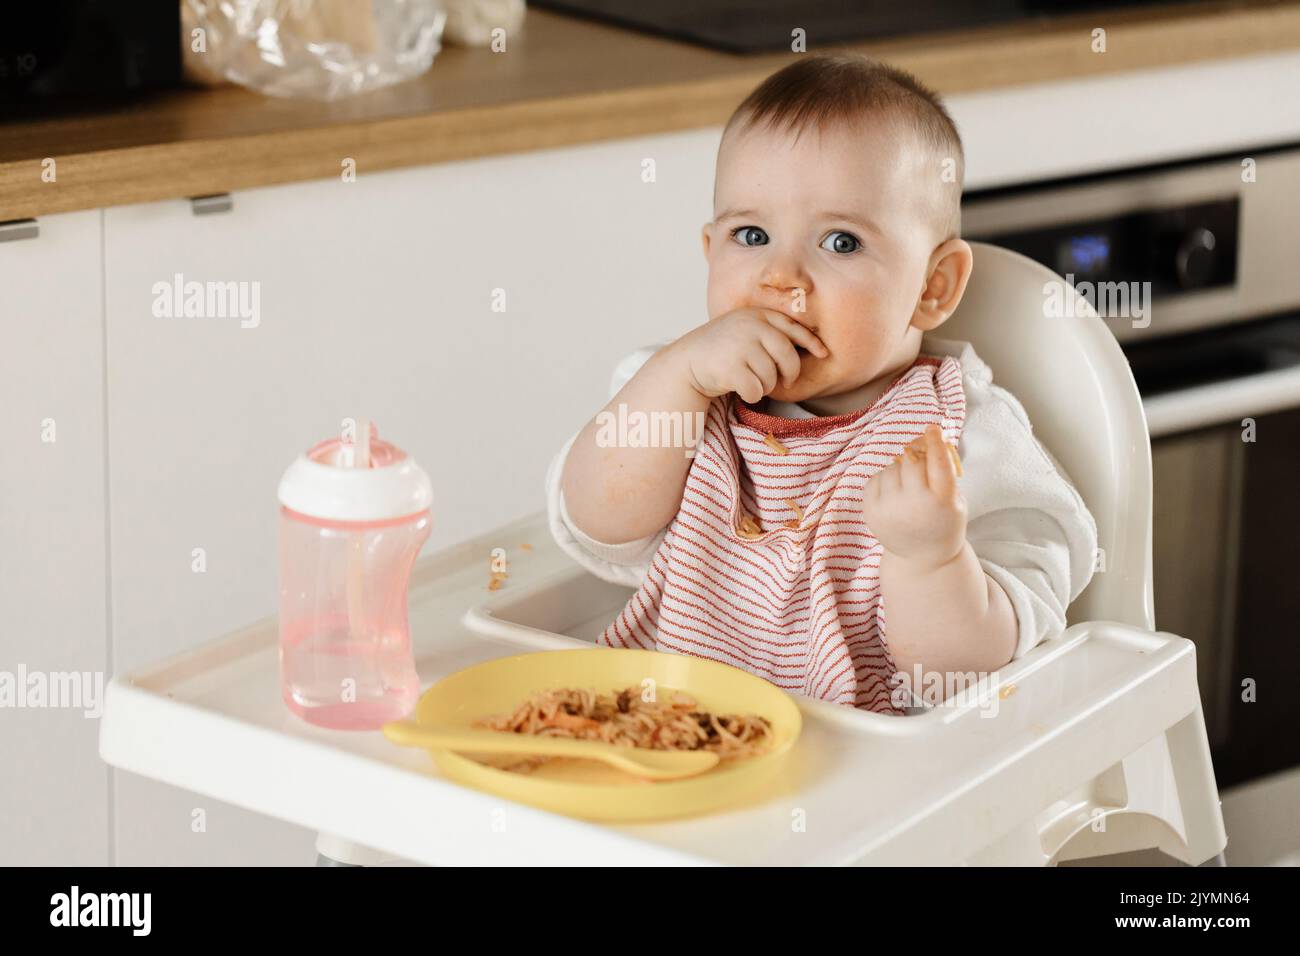 A young baby sitting in a high chair feeding herself spaghetti with a dirty face Stock Photo